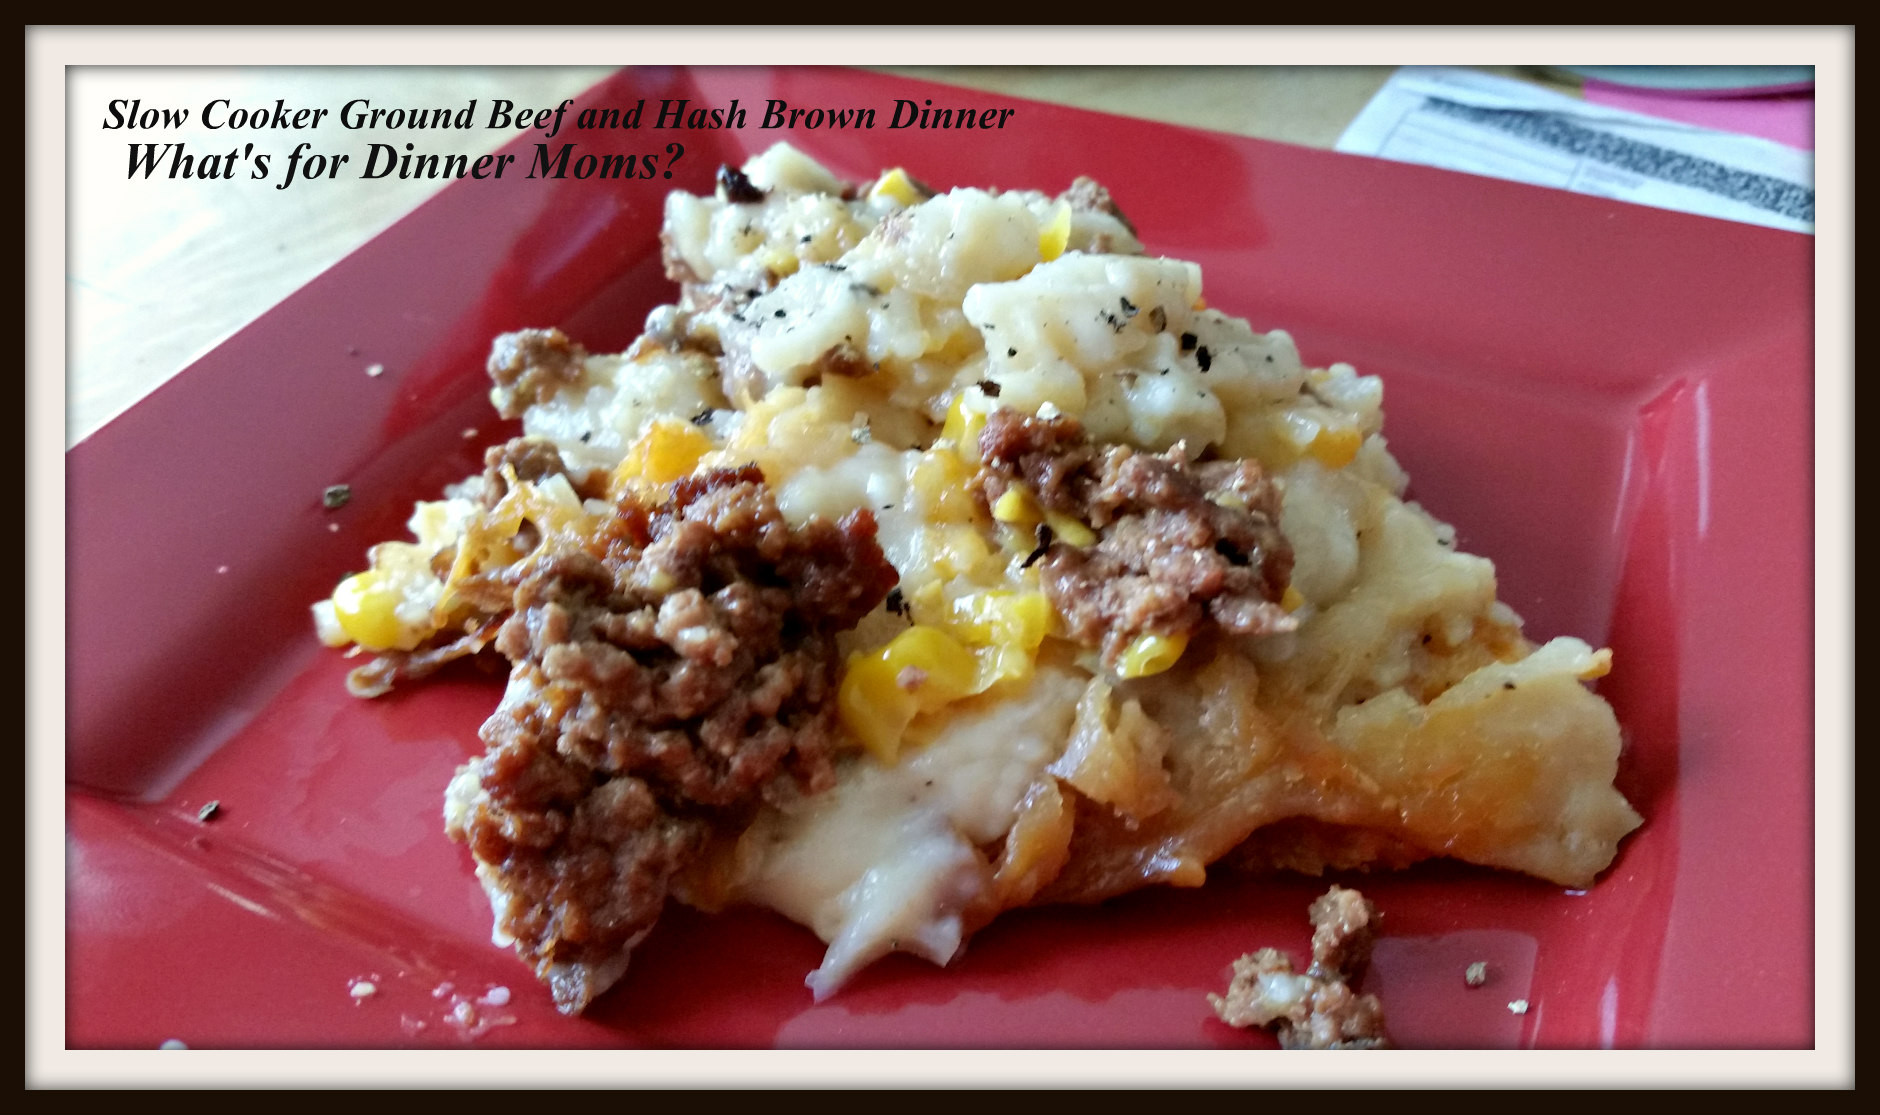 Ground Beef Slow Cooker
 Slow Cooker Ground Beef and Hash Brown Dinner – What s for